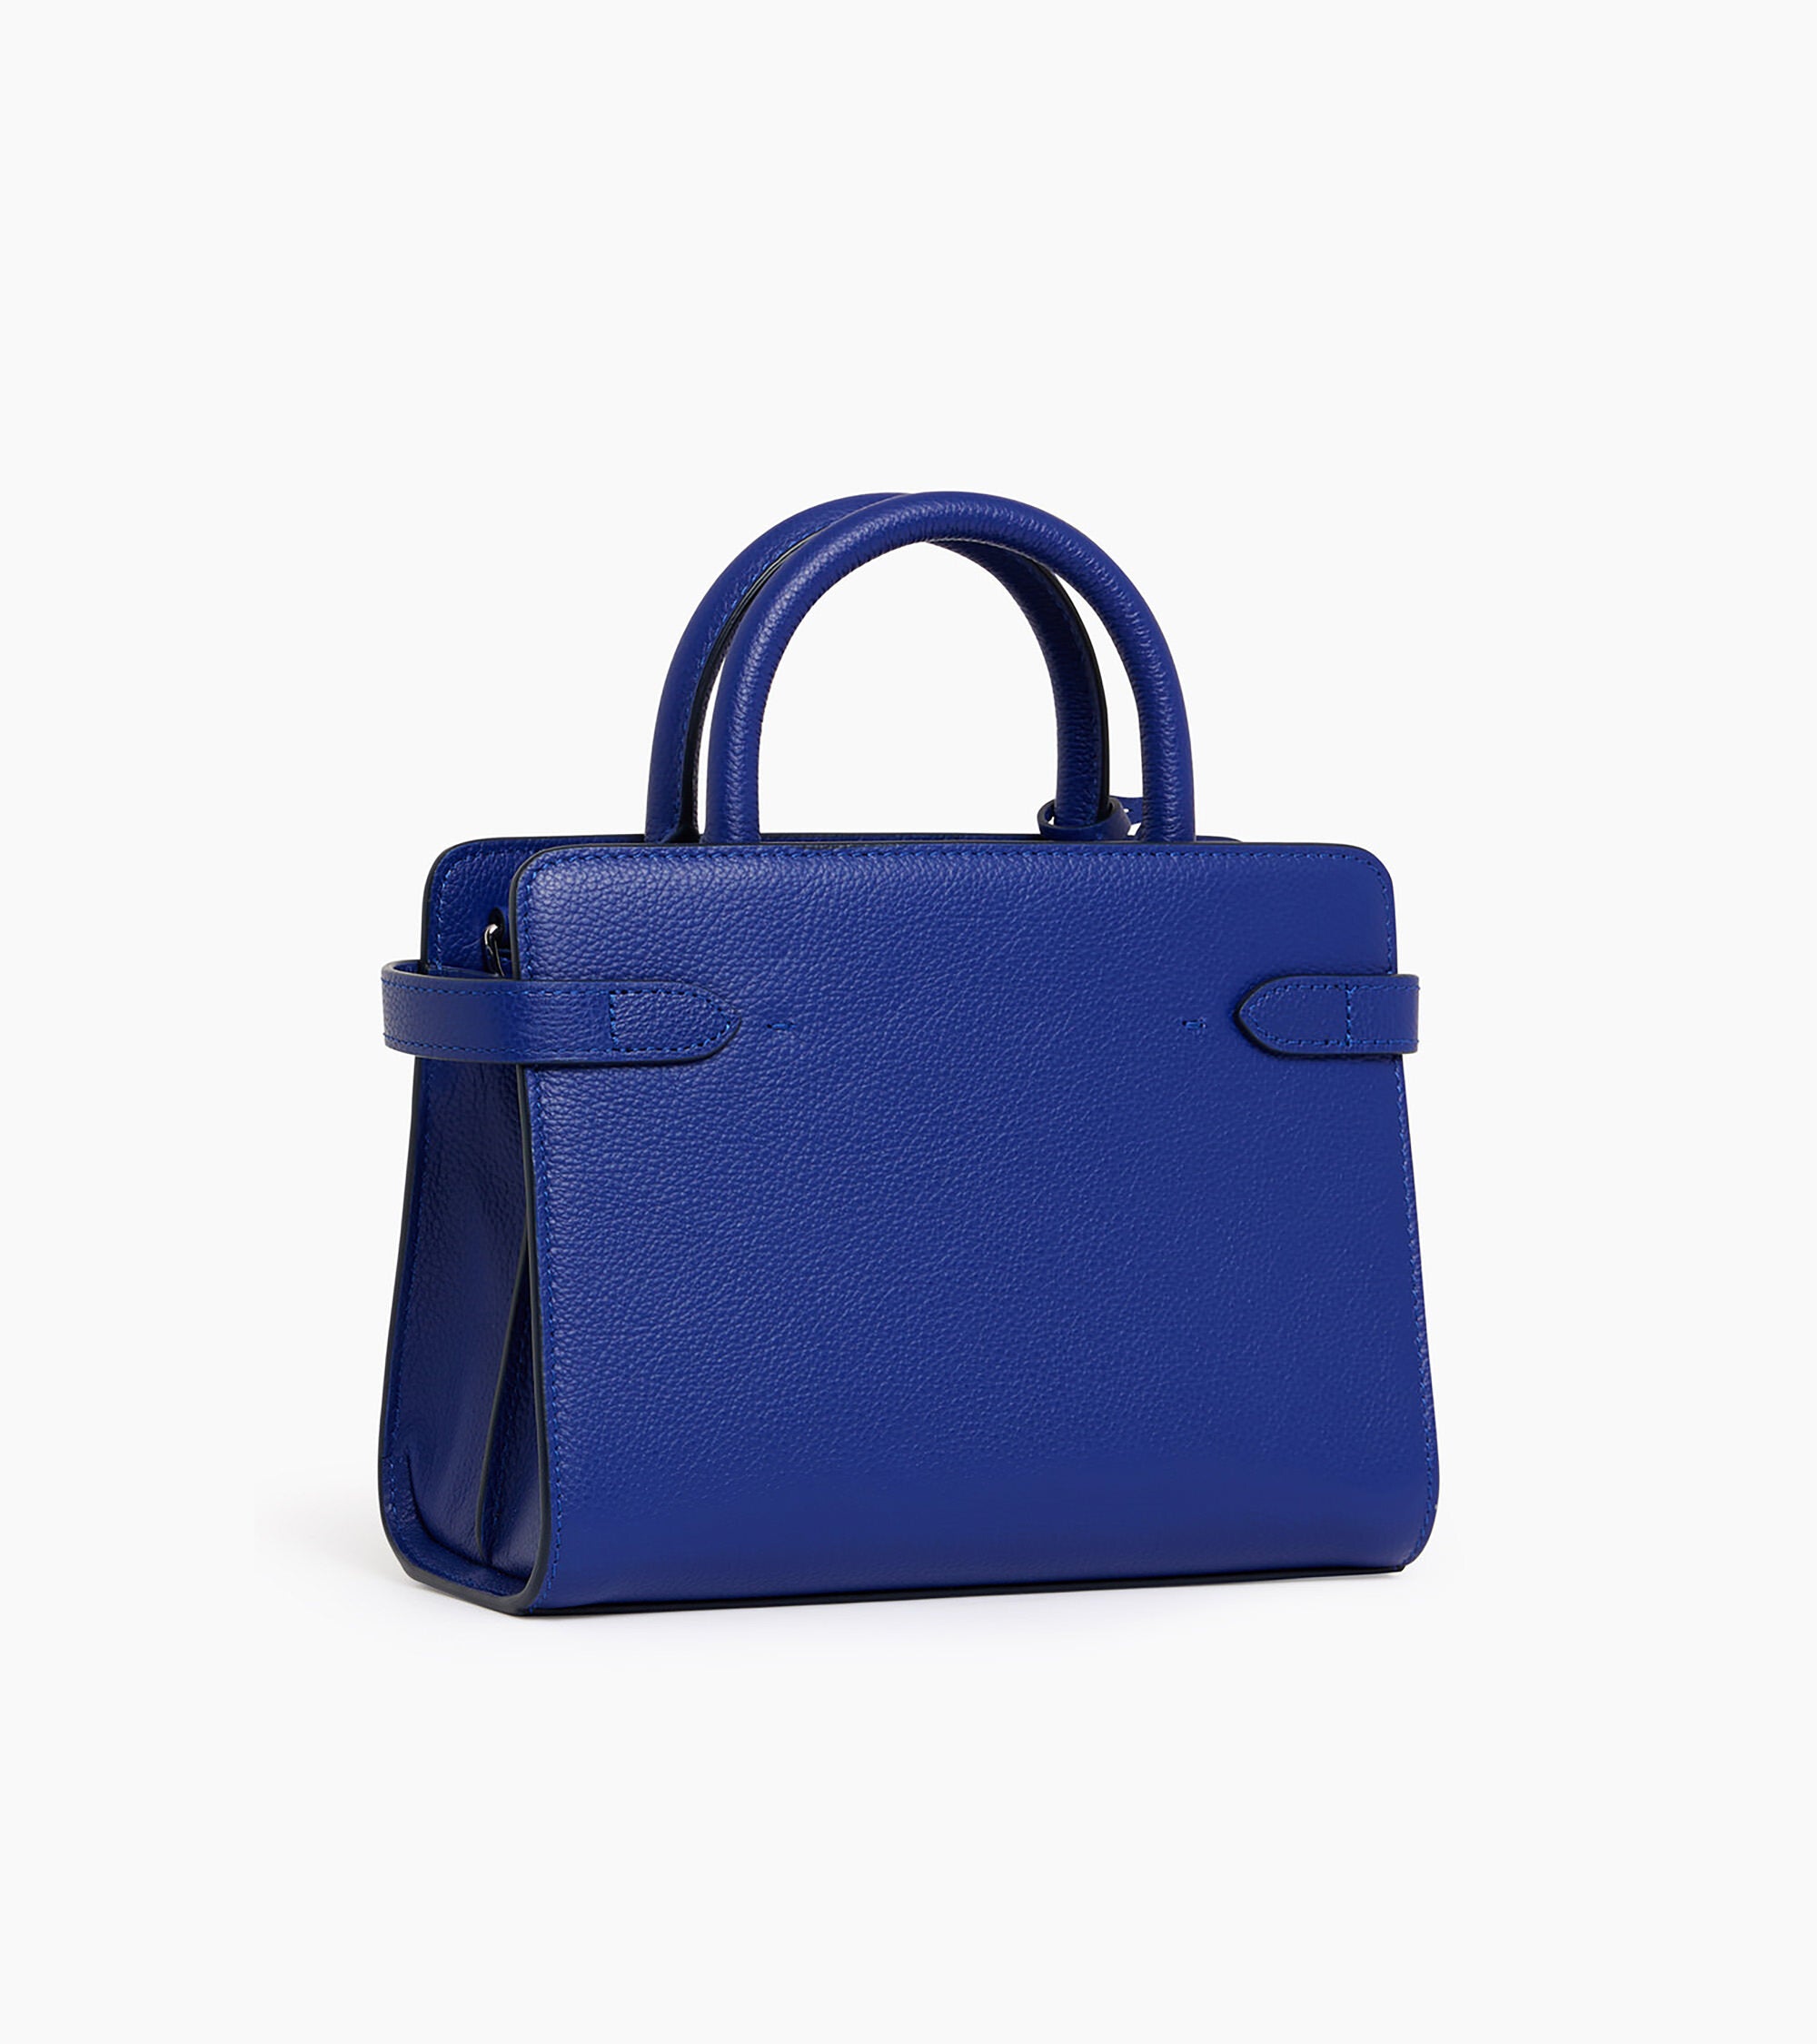 Emilie small handbag in pebbled leather